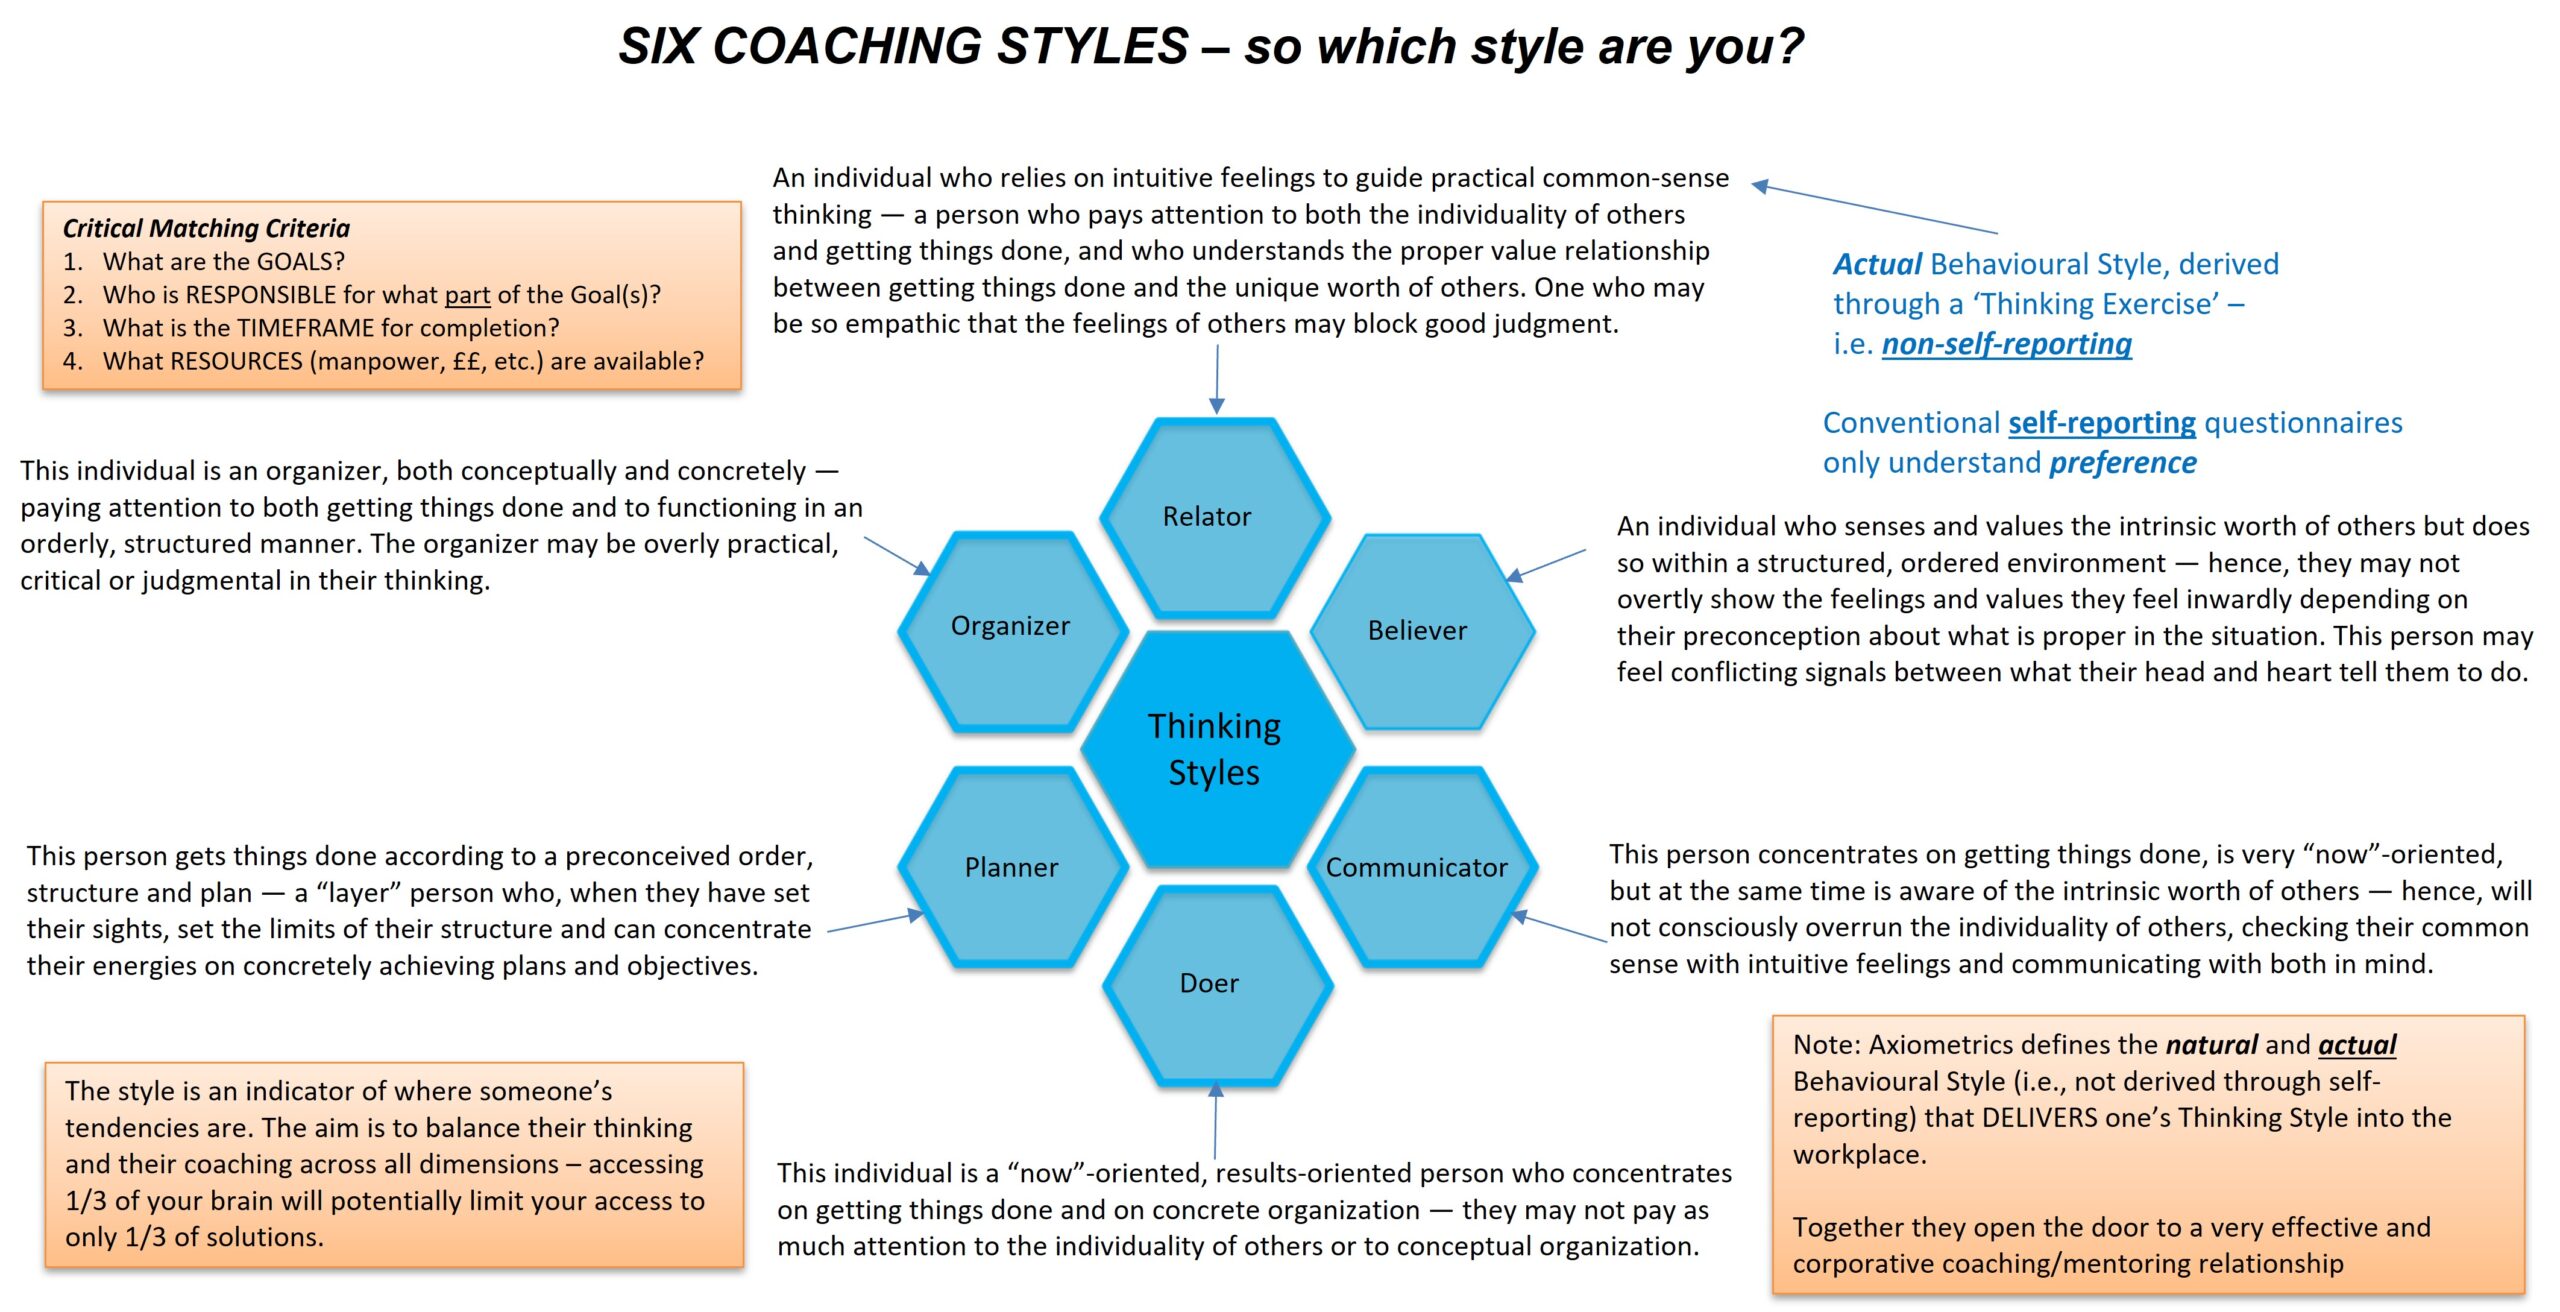 6 Coaching Styles - Which one are you?